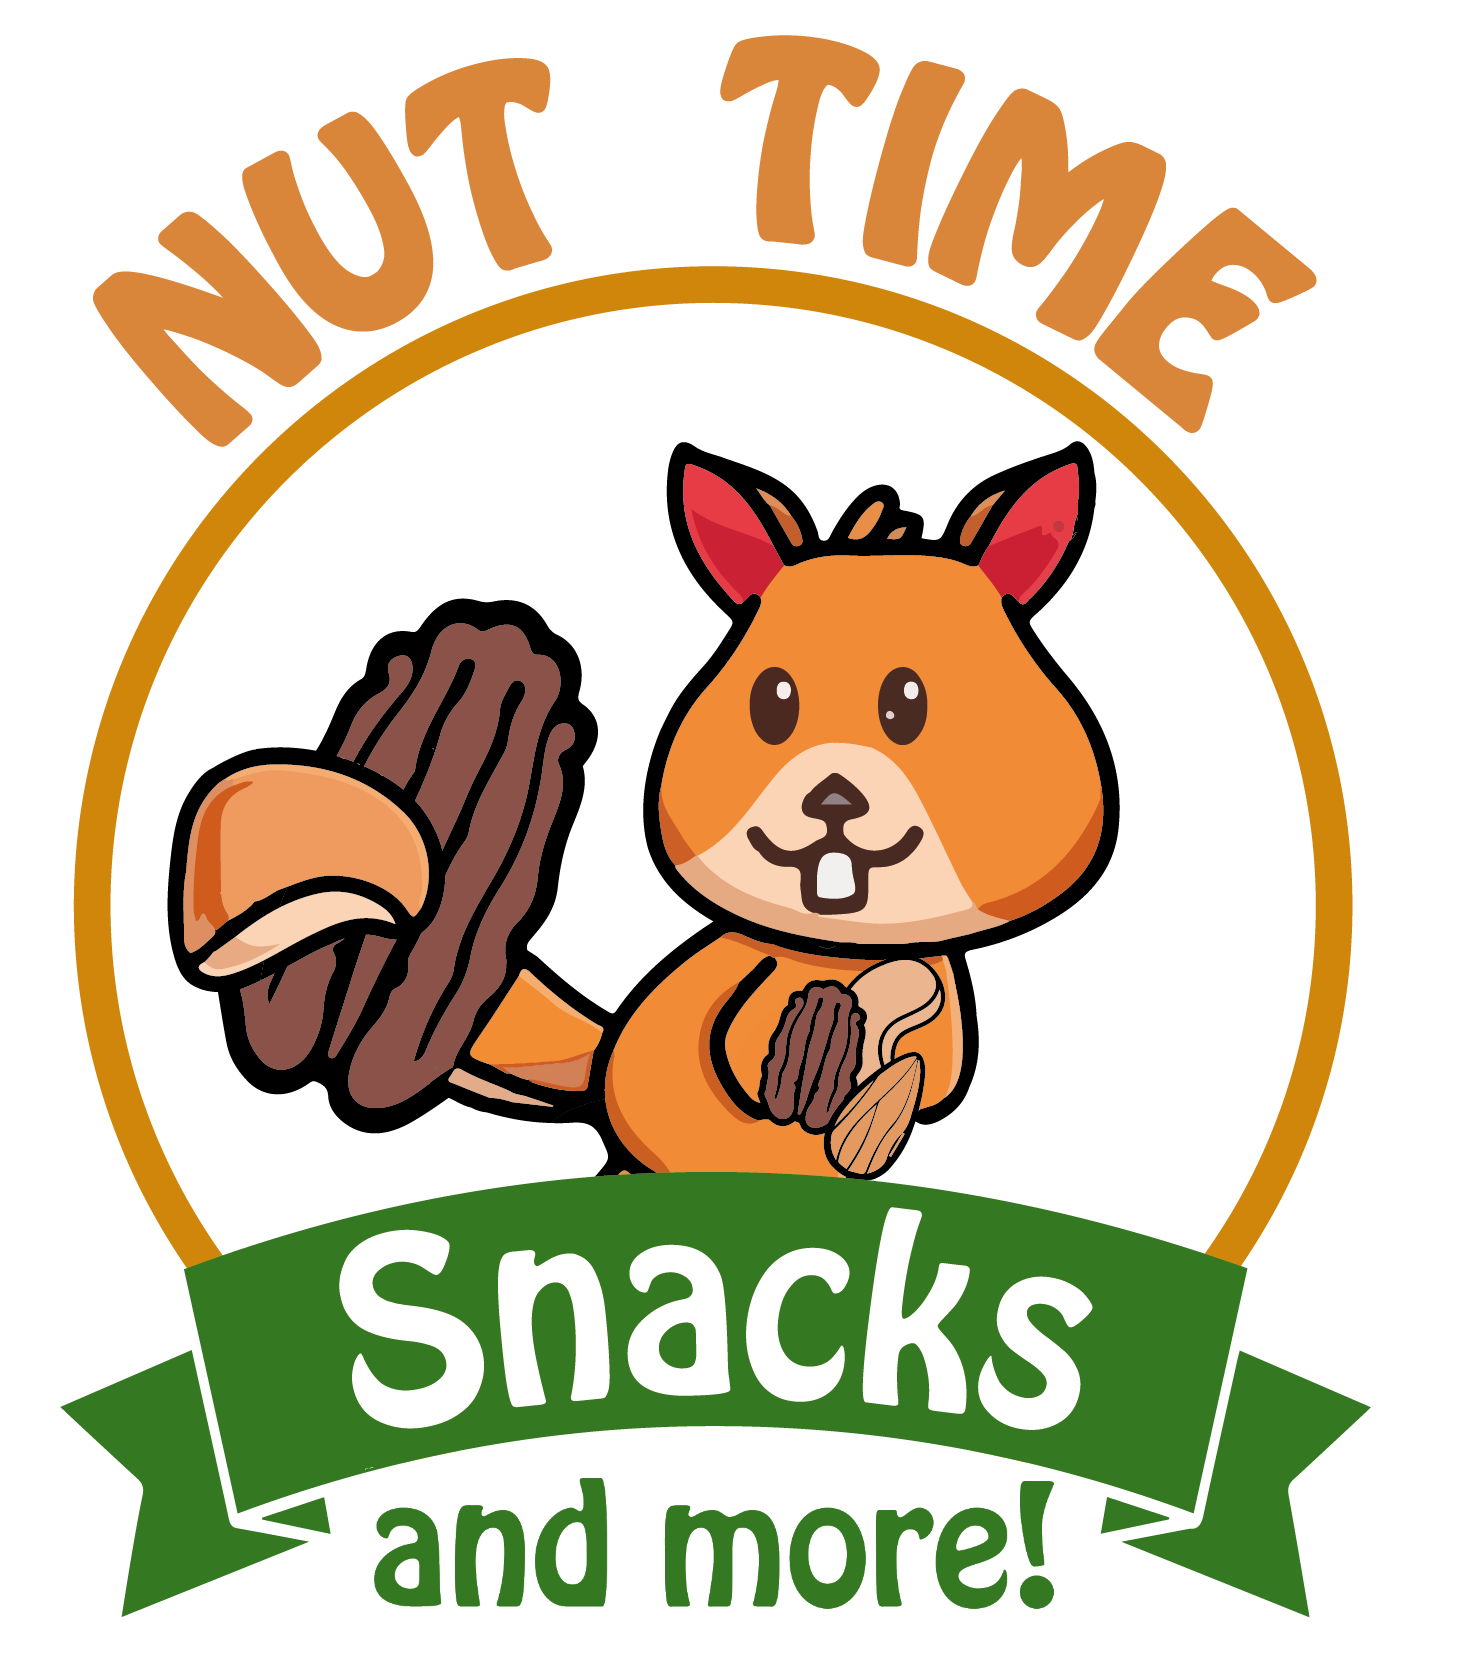 Contact Us - Nut Time Snacks